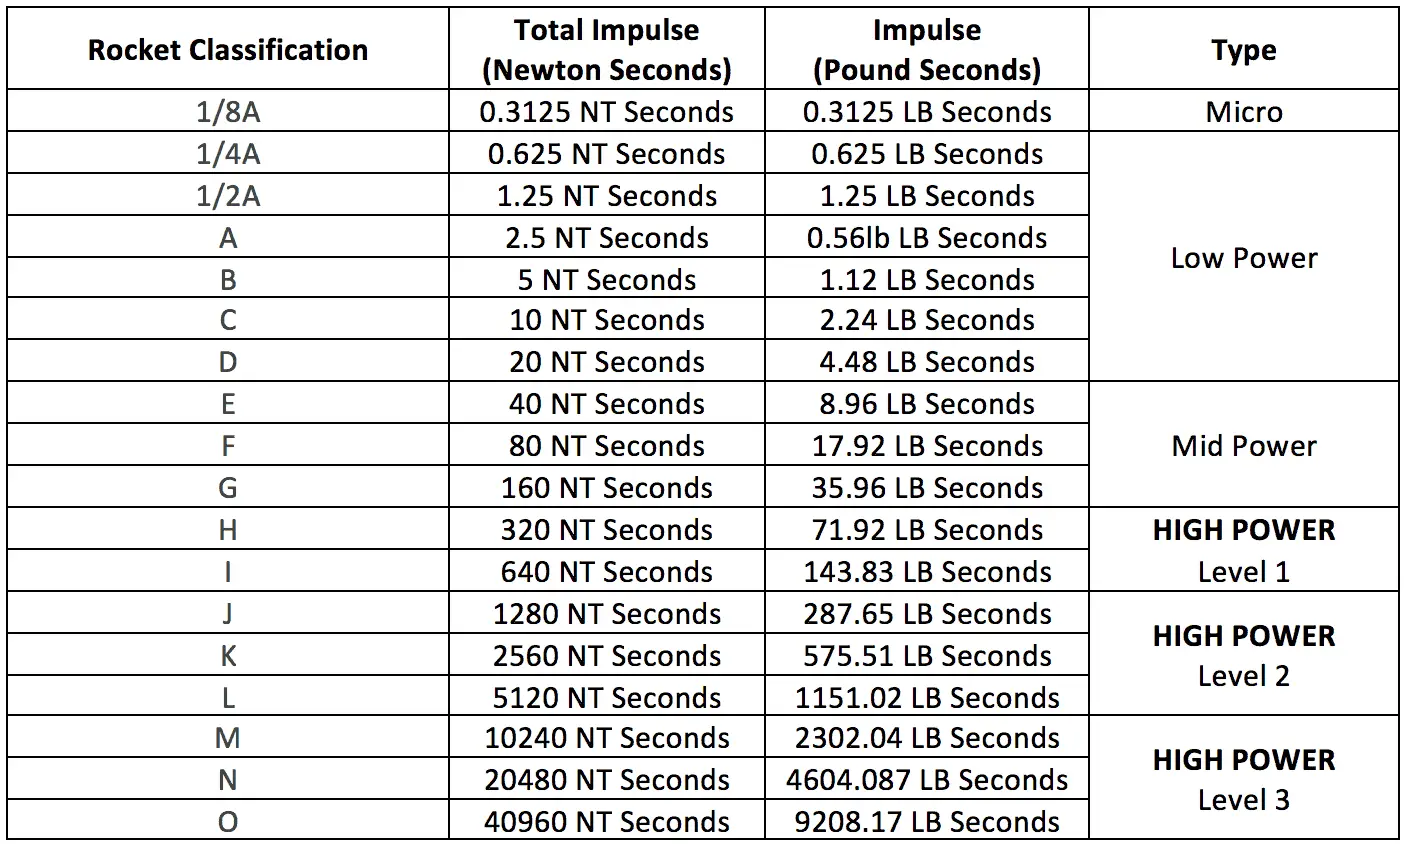 Model Rocket Engine Sizes and Classifications The Model Rocket